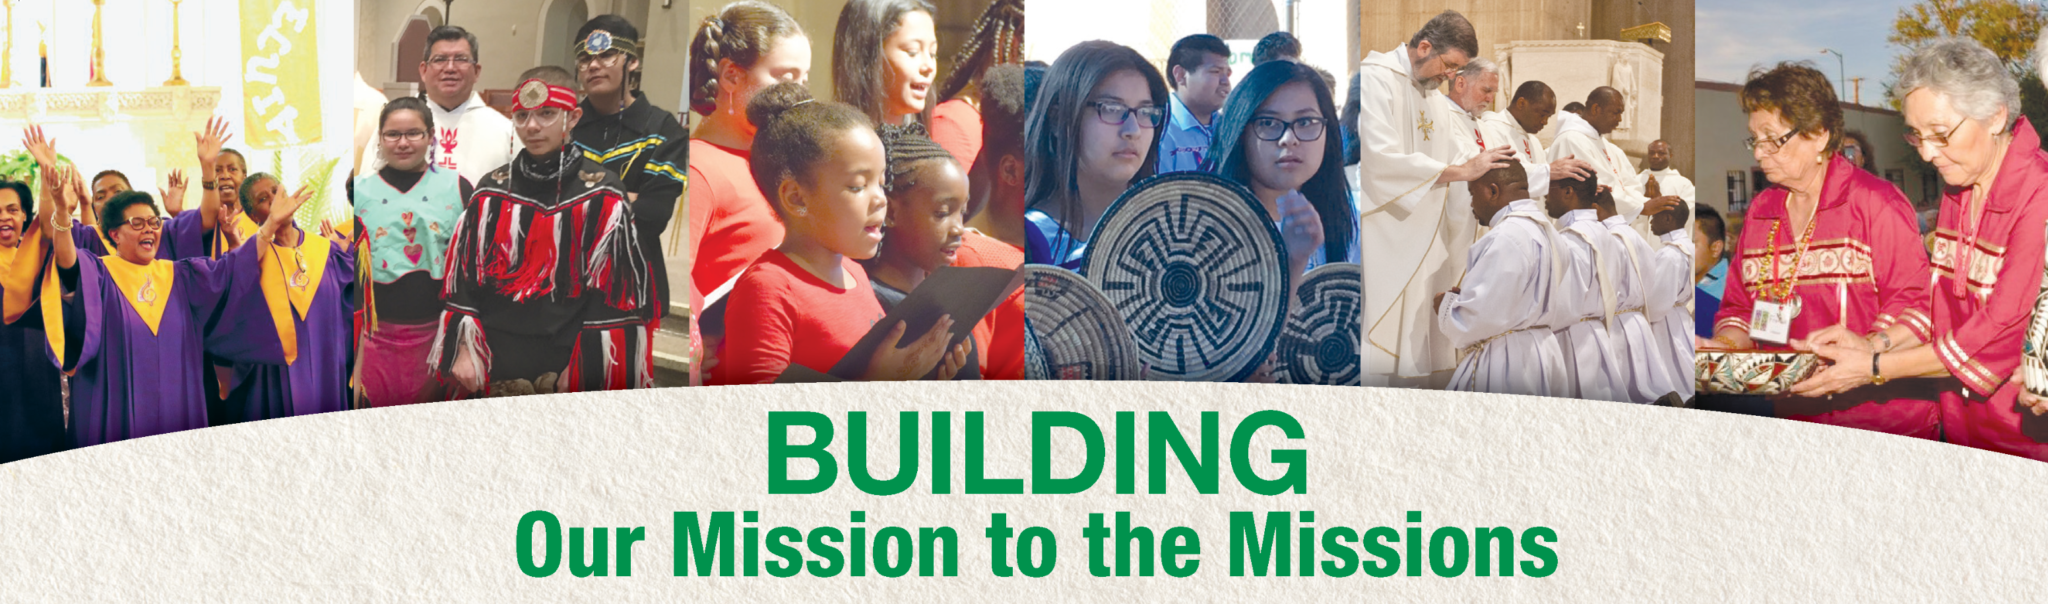 Black and Indian Mission Collection to Occur during Masses This Weekend